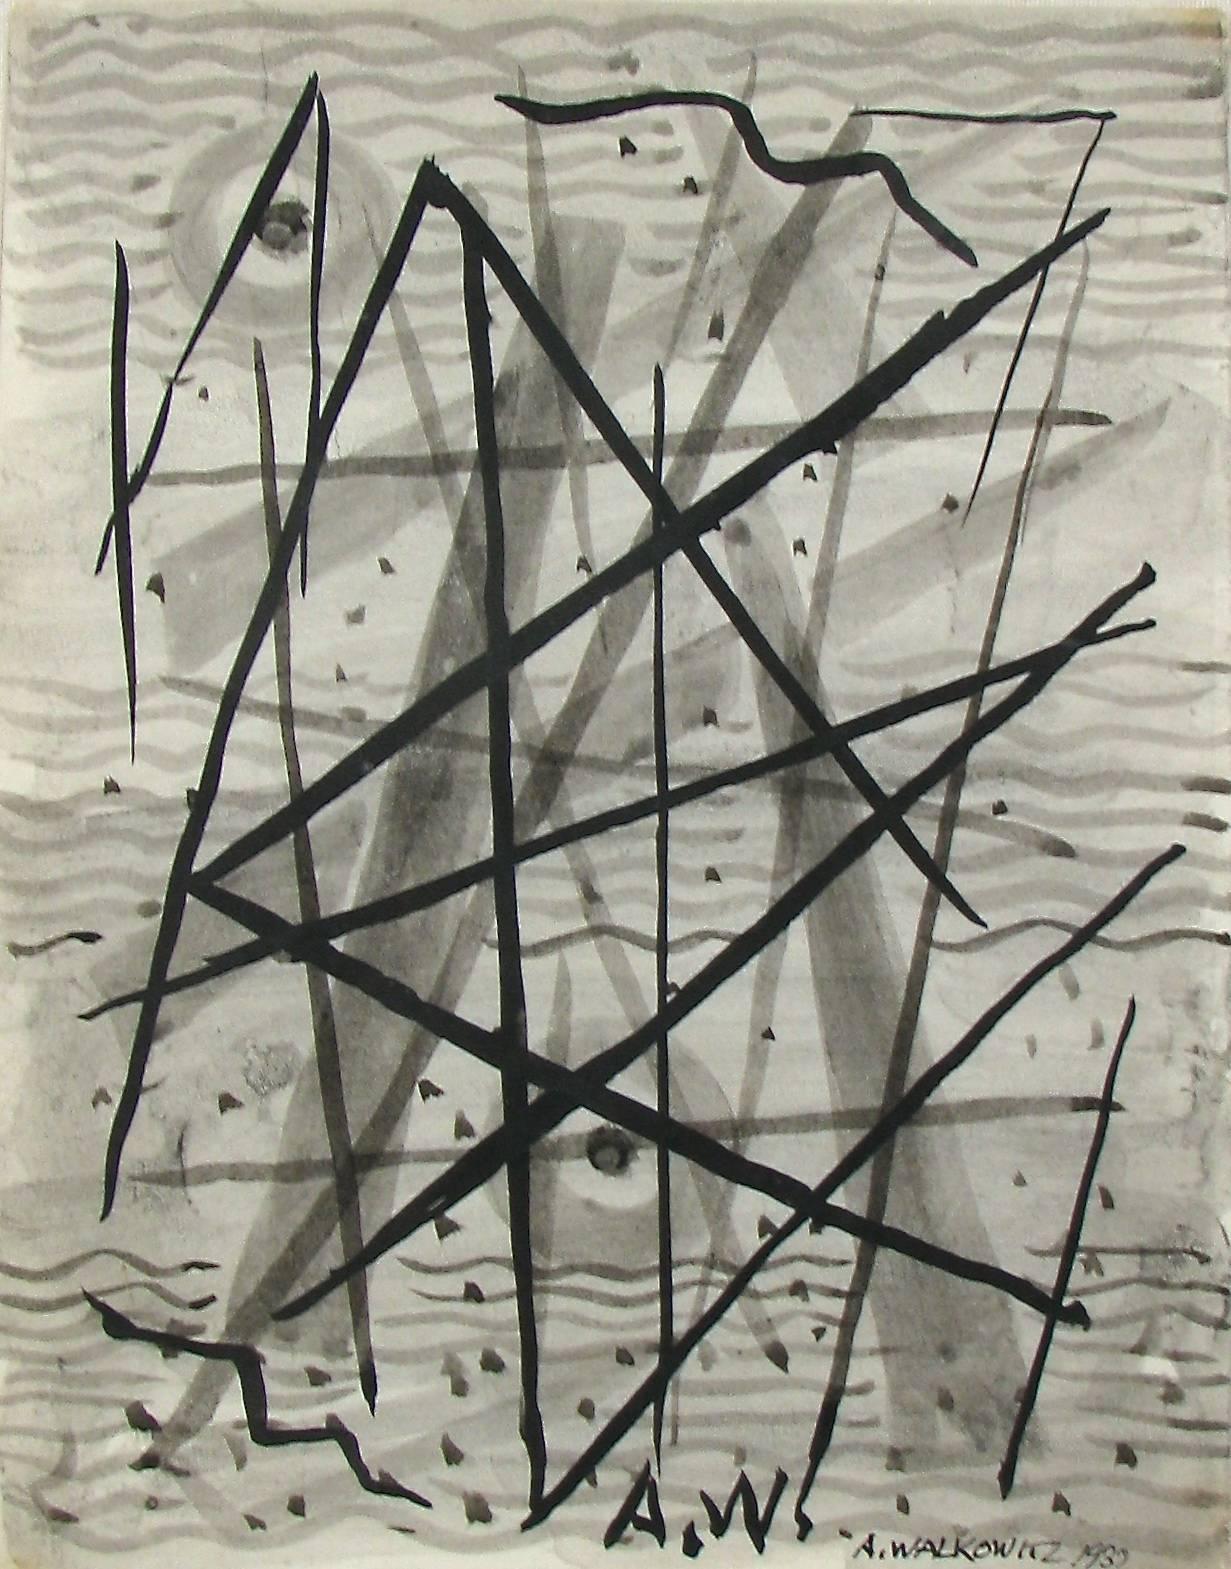 Abraham Walkowitz Abstract Drawing - "Untitled Abstraction" Pen and Ink Drawing Black and White Greyscale Geometric